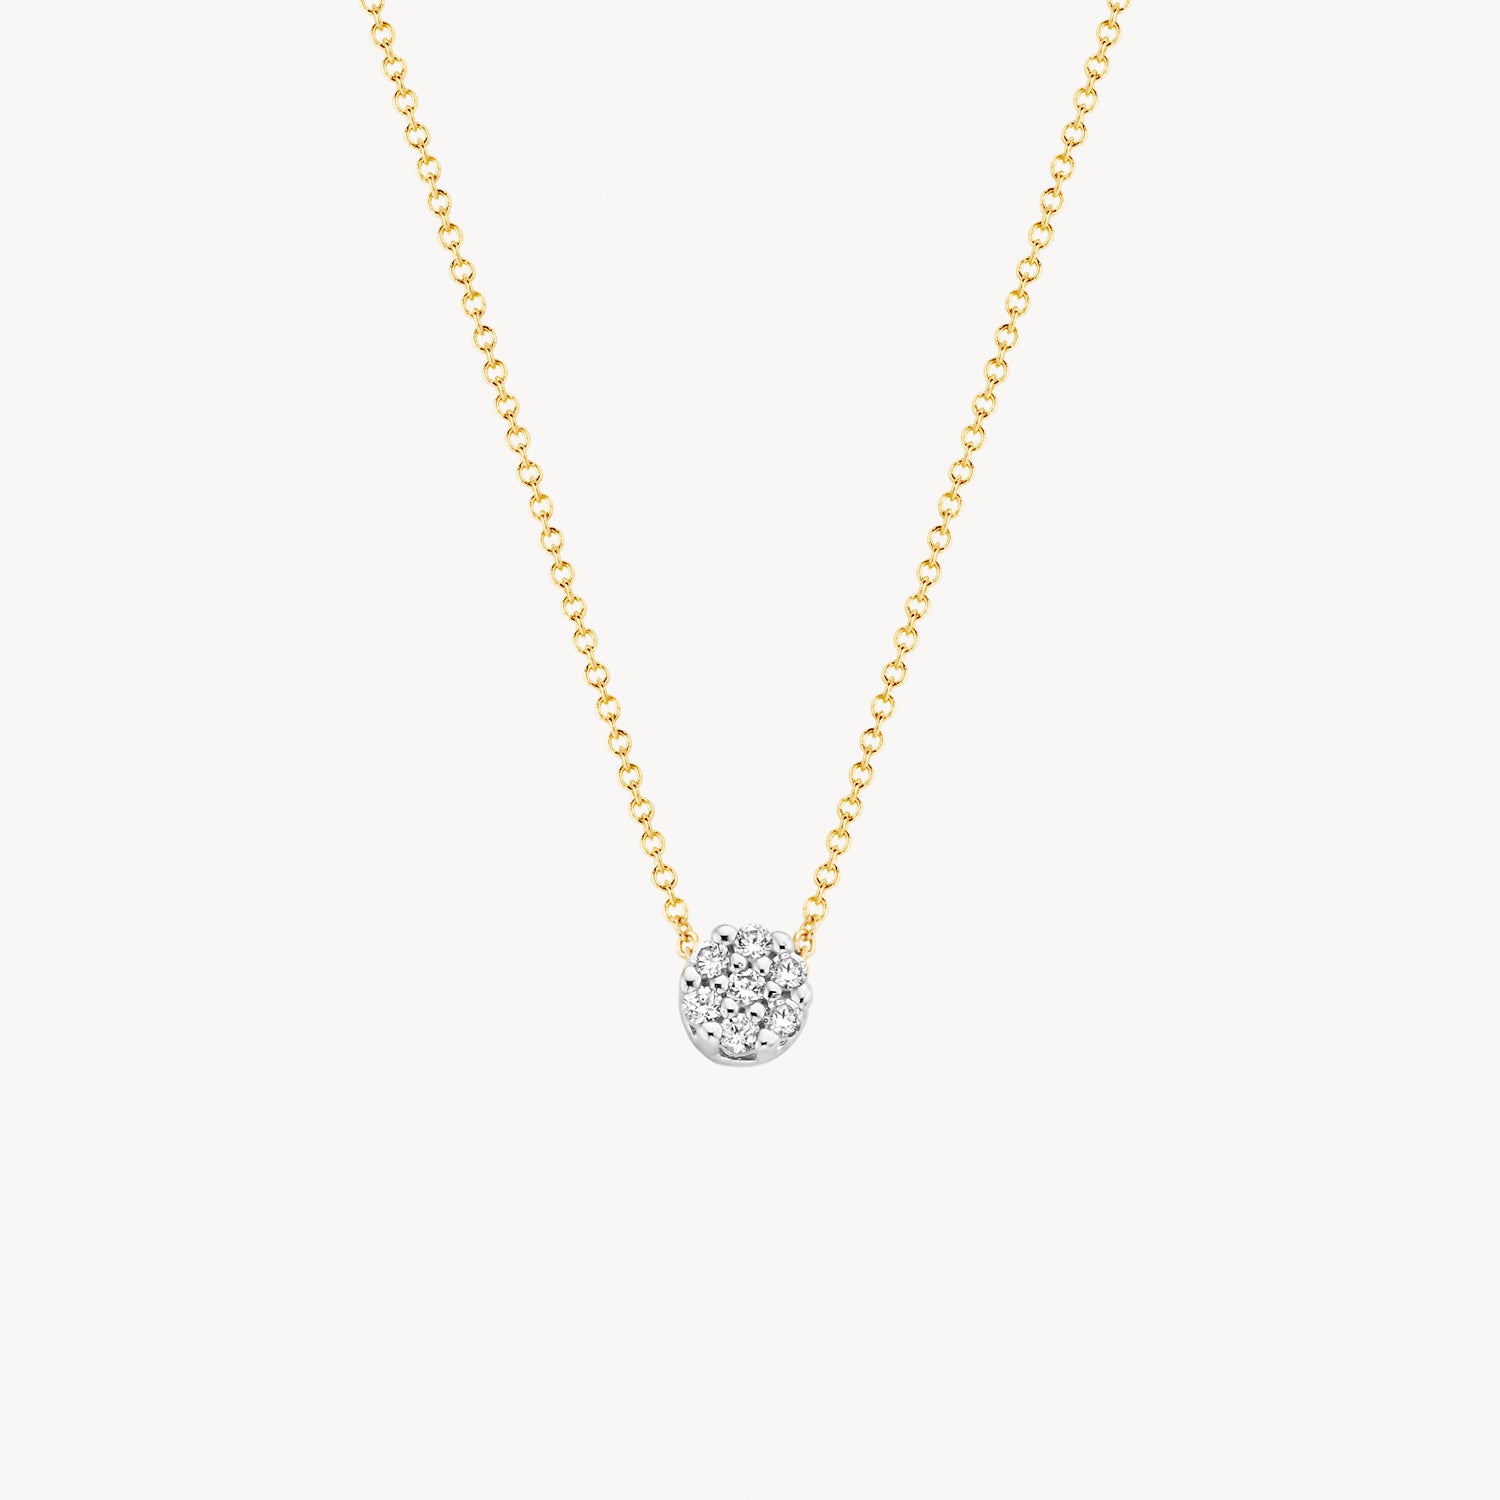 Necklace 3077BZI - 14k Gold and White Gold with zirconia